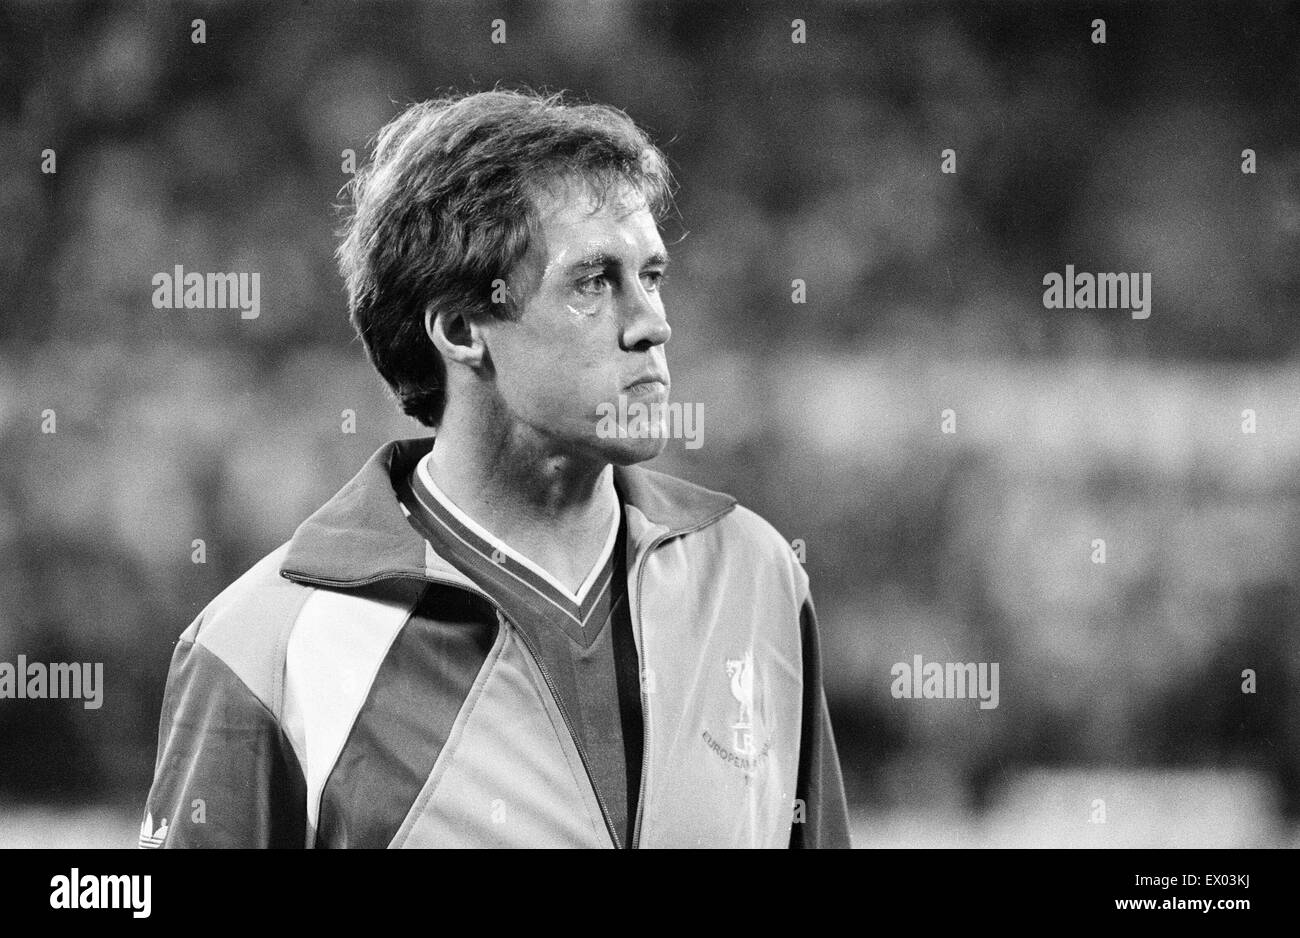 Juventus 1-0 Liverpool, 1985 European Cup Final, Heysel Stadium, Brussels, Belgium, Wednesday 29th May 1985. Match Action. Phil Neal, Liverpool, Player, Captain. Stock Photo